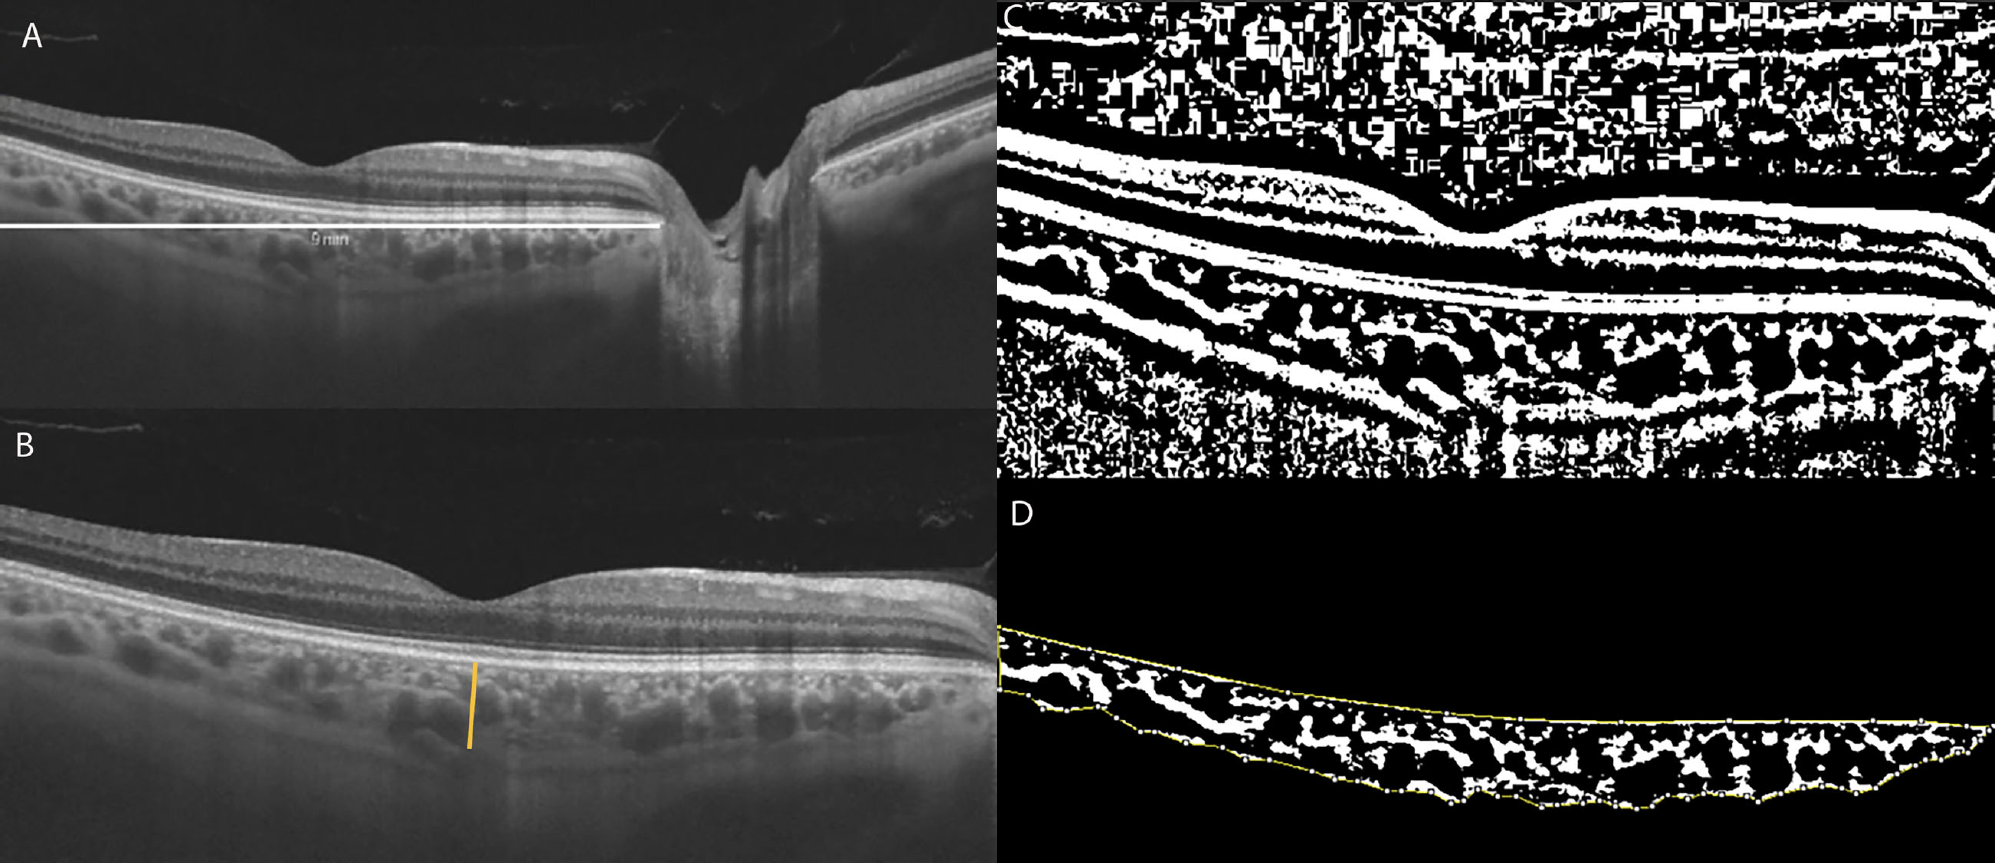 CVI is calculated by demarcating a 9mm horizontal B-scan at the fovea (fig. A, white line) and calculating the subfoveal choroidal thickness (fig. B, orange line). The image is then converted to black and white (fig. C), with the dark pixels representing the vessels’ luminal area and the white pixels the stromal area. Finally, the total choroidal area—the space between the yellow lines—is isolated, with the RPE representing the anterior boundary and the scleral-choroidal interface as the posterior boundary, across the entire length of the scan. Total luminal area divided by total choroidal area represents the CVI, a measure of the structure’s vascular capacity. This particular study found that tracking CVI might help further our understanding of the role of the choroid in the pathogenesis of POAG and PACG.